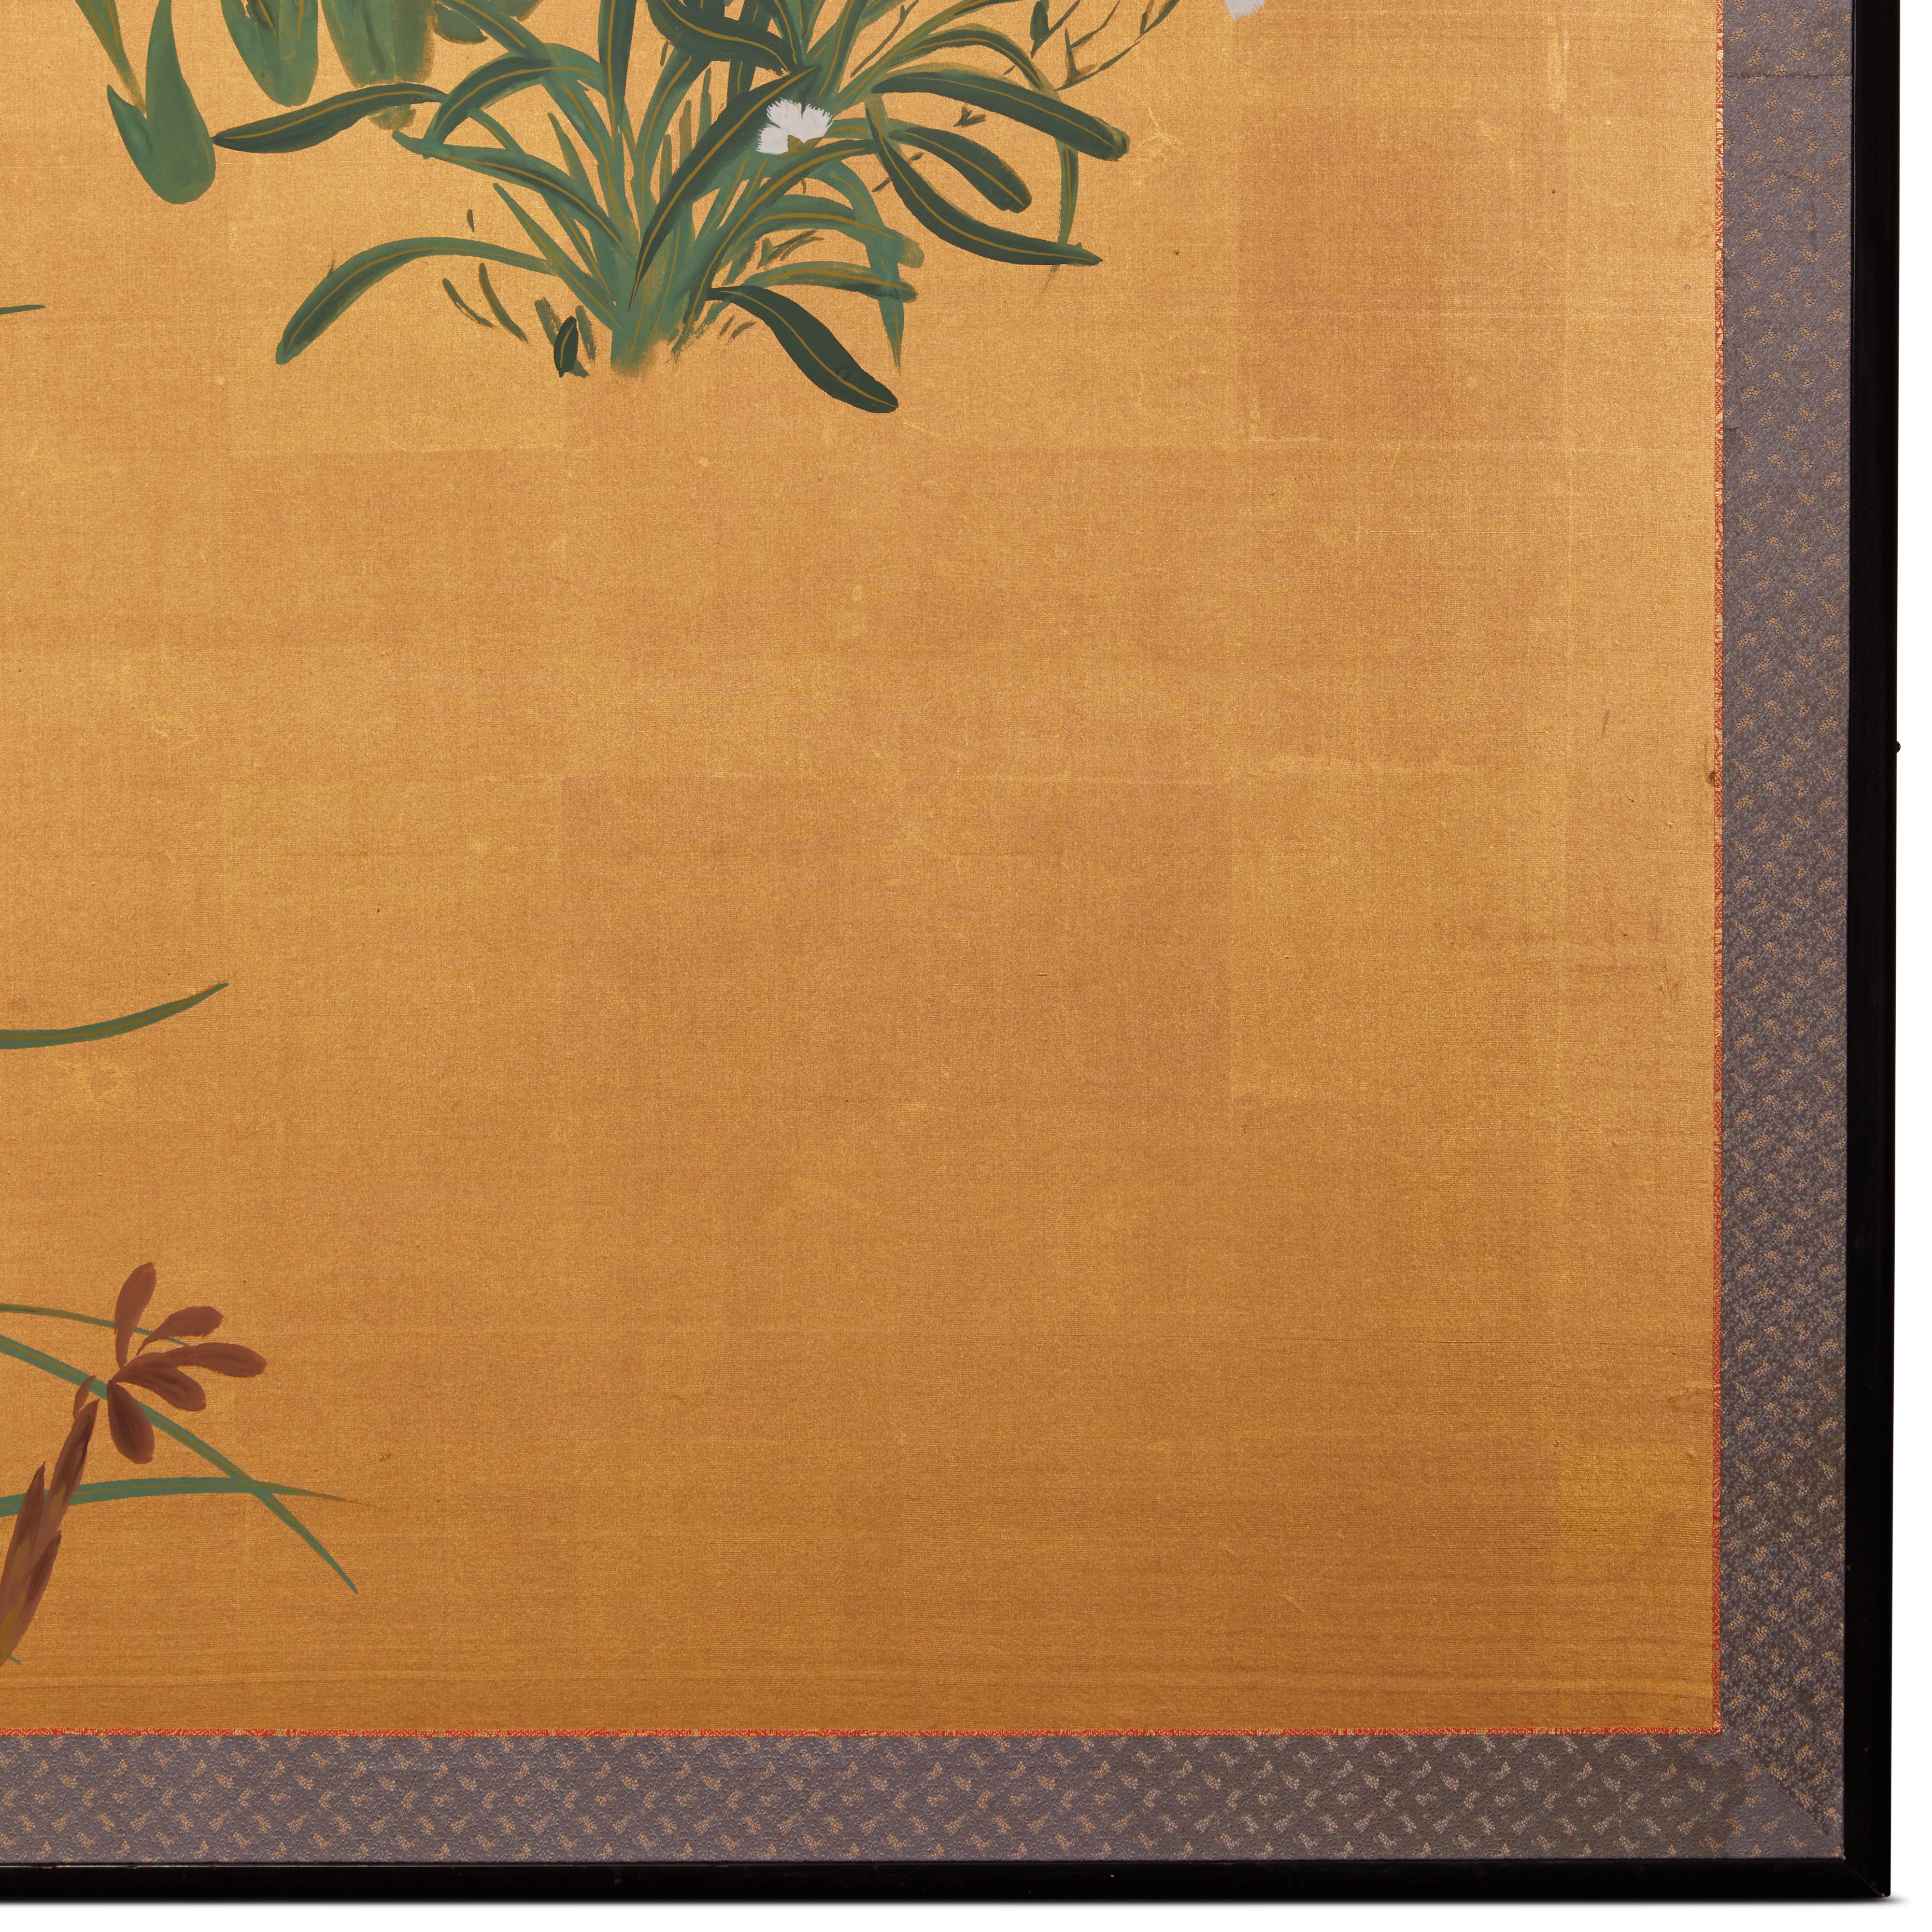 Showa period (1926 - 1989) painting with a strong design of exotic lilies and a cluster of nadeshiko (dianthus) under a silver moon on gold.  This painting has a modern flair, which is indicative of the time it was painted.  In the 1950s, Japanese